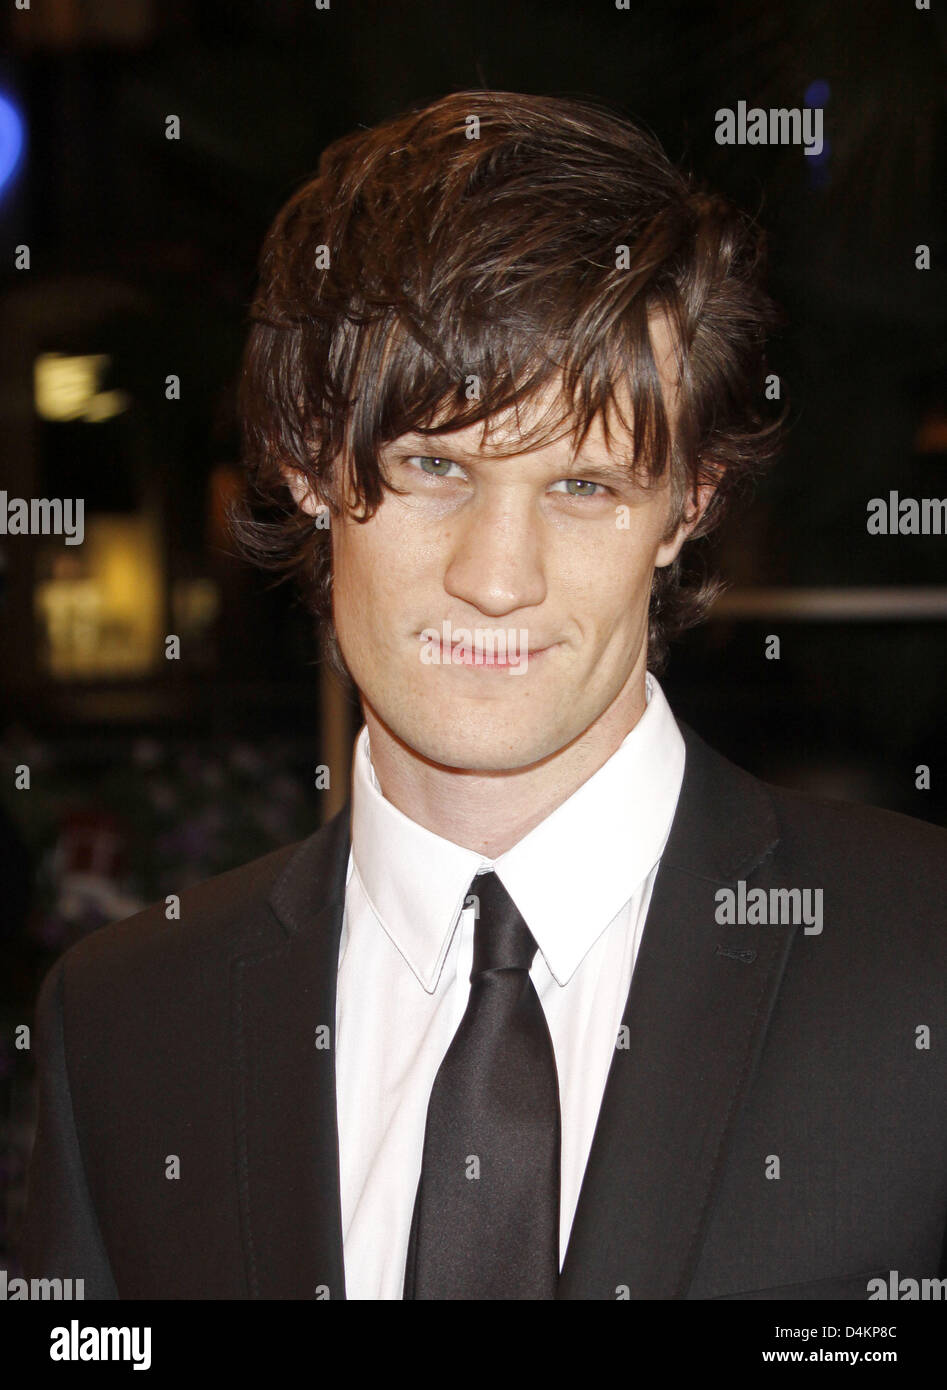 British actor Matt Smith arrives at the premiere of the film ?Fish Tank? which runs in competition at the 62nd Cannes Film Festival in Cannes, France, 14 May 2009. The film festival will take place from 13 until 24 May 2009. Photo: Hubert Boesl Stock Photo